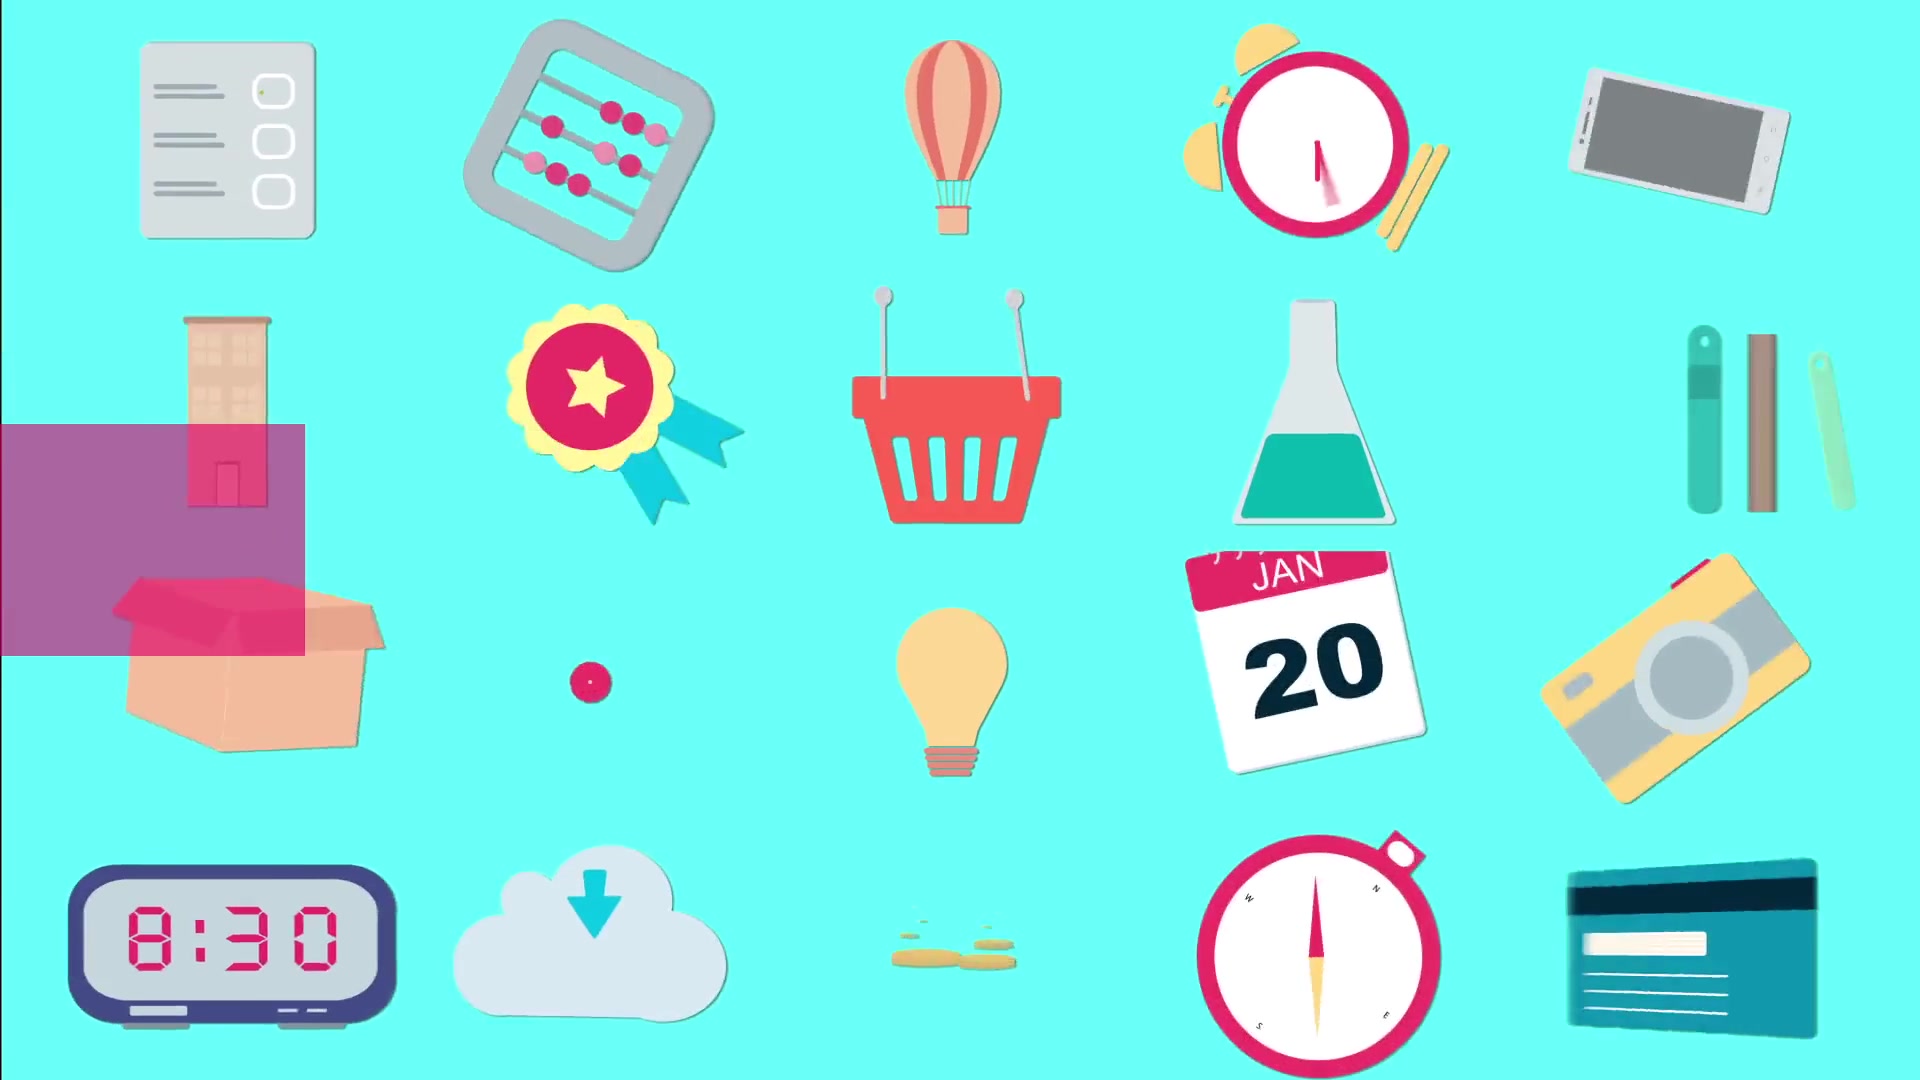 Explainer Video Toolkit | Toon City 3 - Download Videohive 20388674